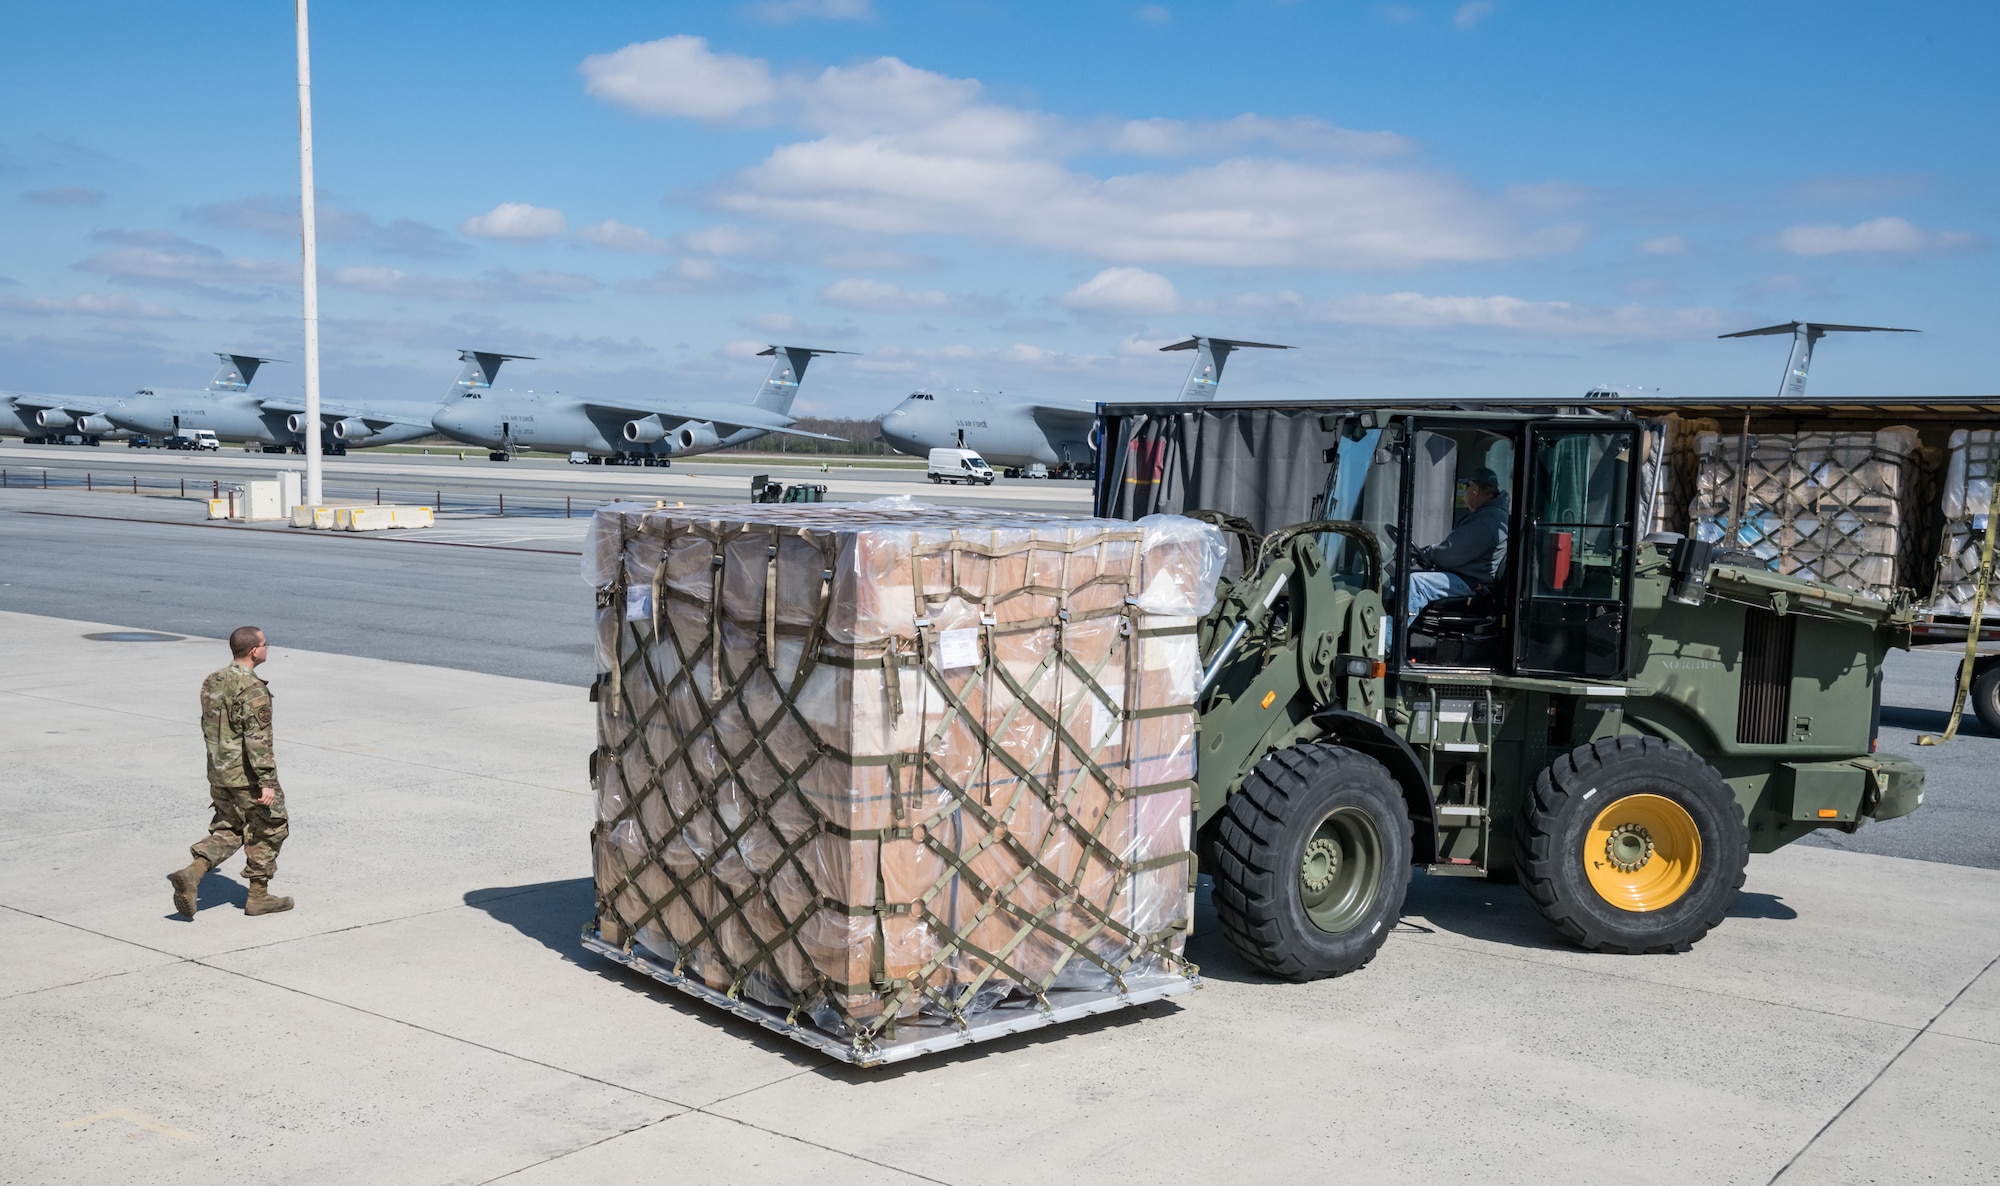 Airman 1st Class Emmanuel Arroyo, 436th Aerial Port Squadron traffic management office, marshals a 10K all-terrain forklift driven by Eric Banks, 436th APS, March 26, 2020, at Dover Air Force Base, Delaware. Arroyo and Banks loaded numerous pallets onto the trailer as required airlift operations continued during the evolving COVID-19 pandemic. (U.S. Air Force photo by Roland Balik)